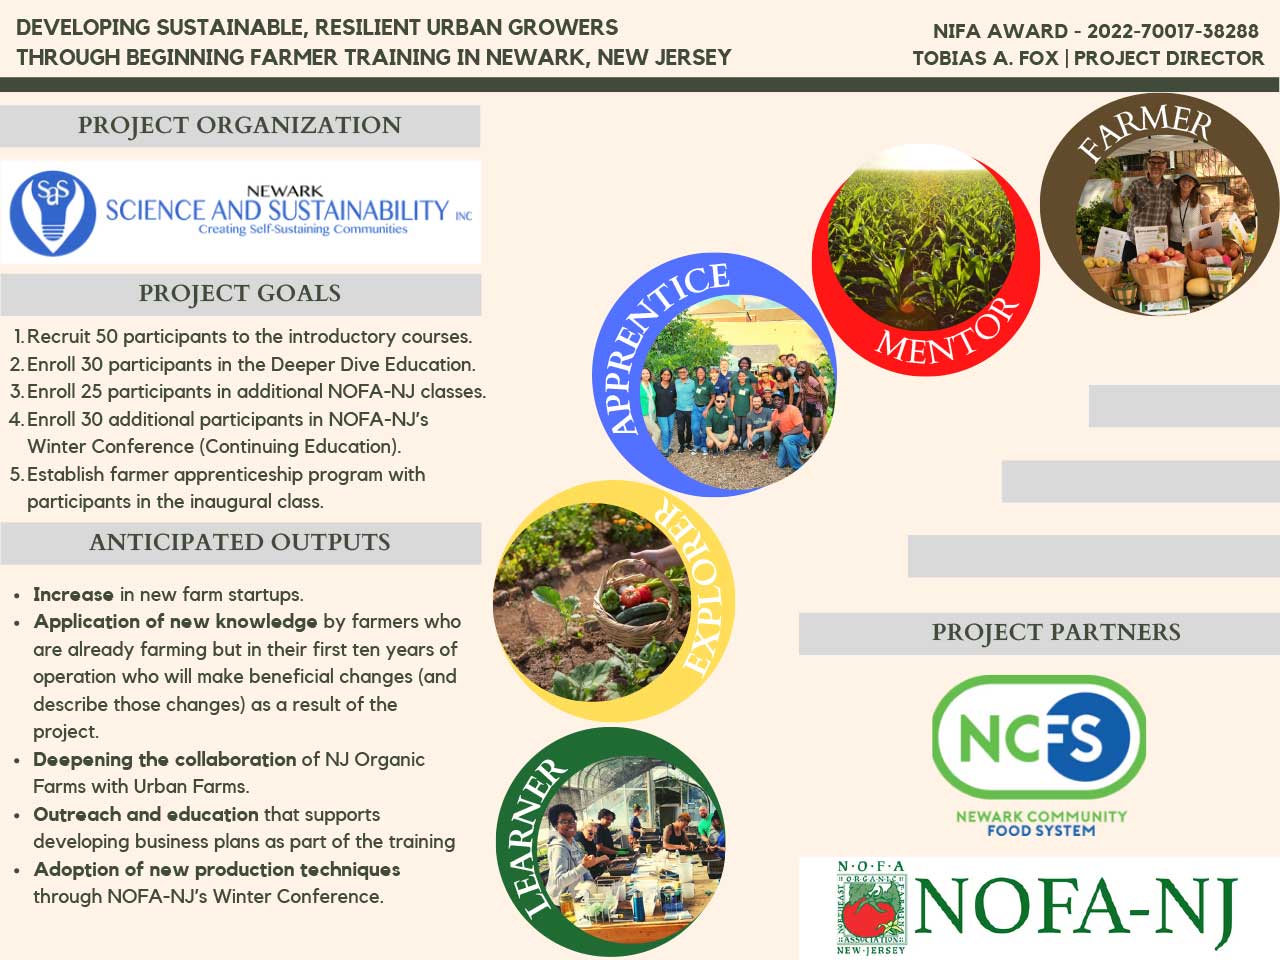 Developing Sustainable, Resilient Urban Growers Through Beginning Farmer Training in Newark, New Jersey poster